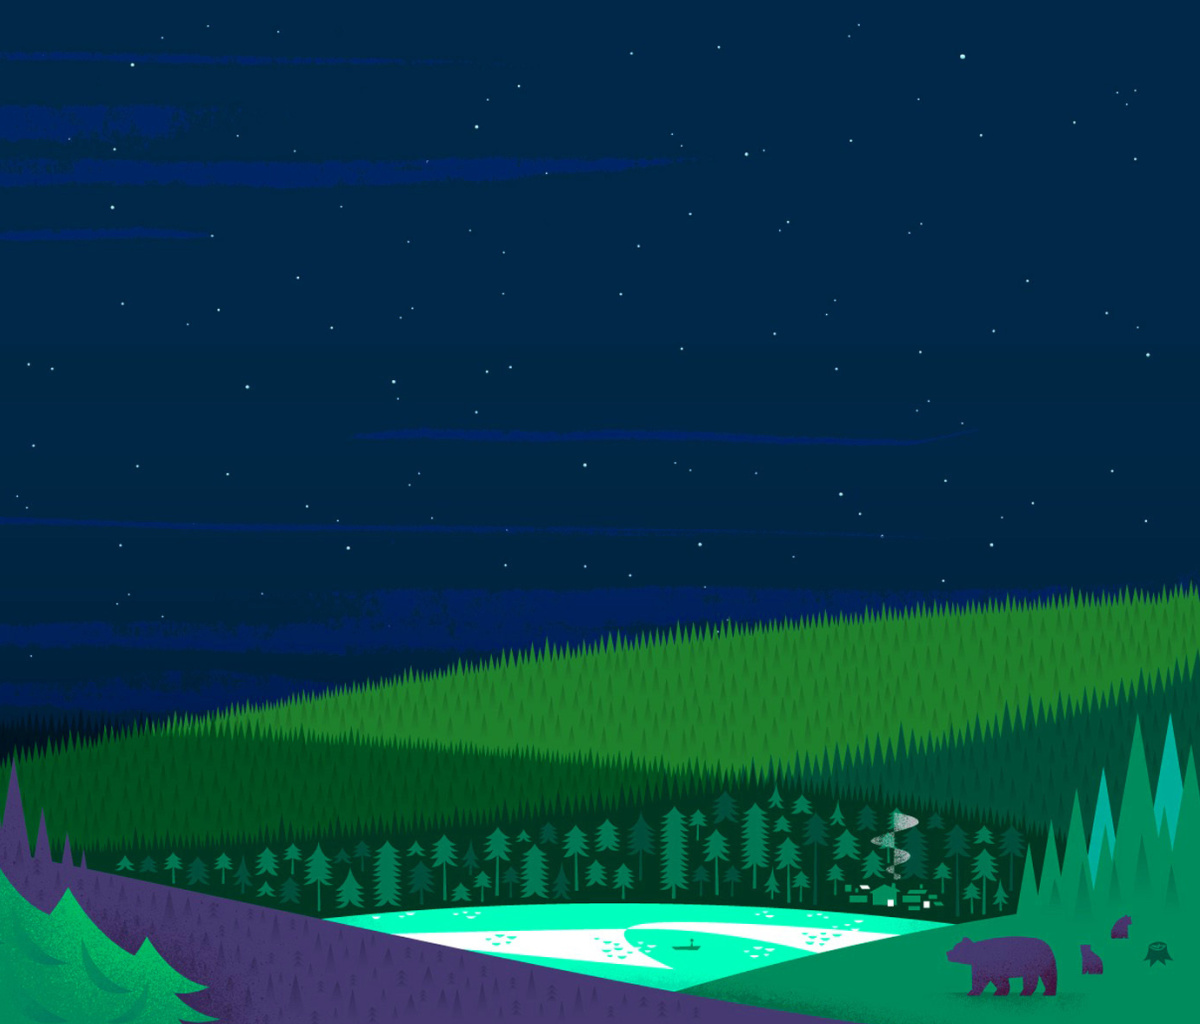 Graphics night and bears in forest screenshot #1 1200x1024